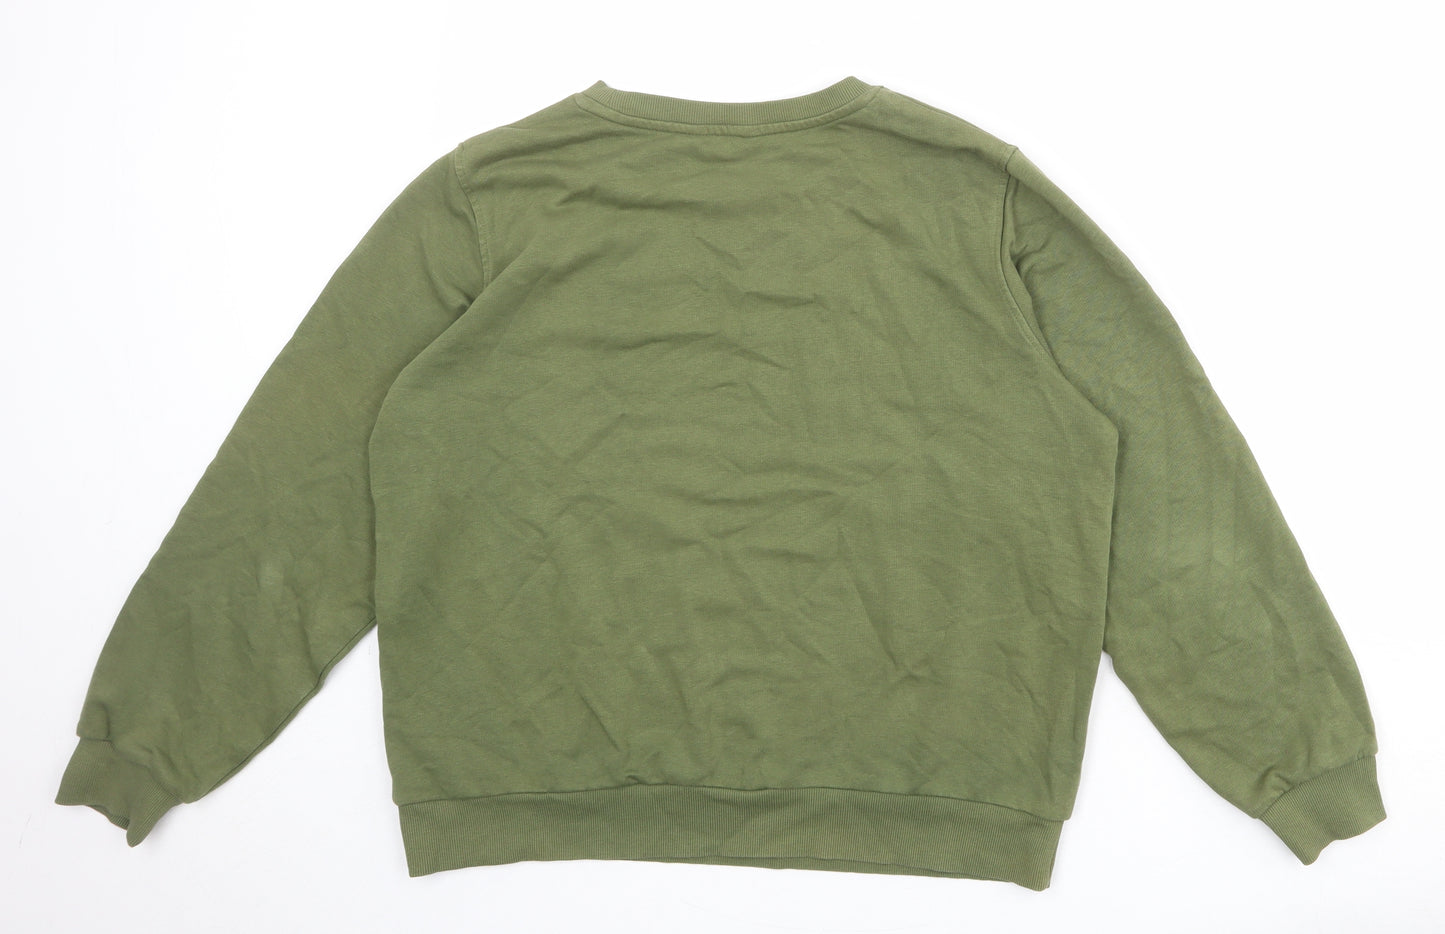 Marks and Spencer Womens Green Cotton Pullover Sweatshirt Size 16 Pullover